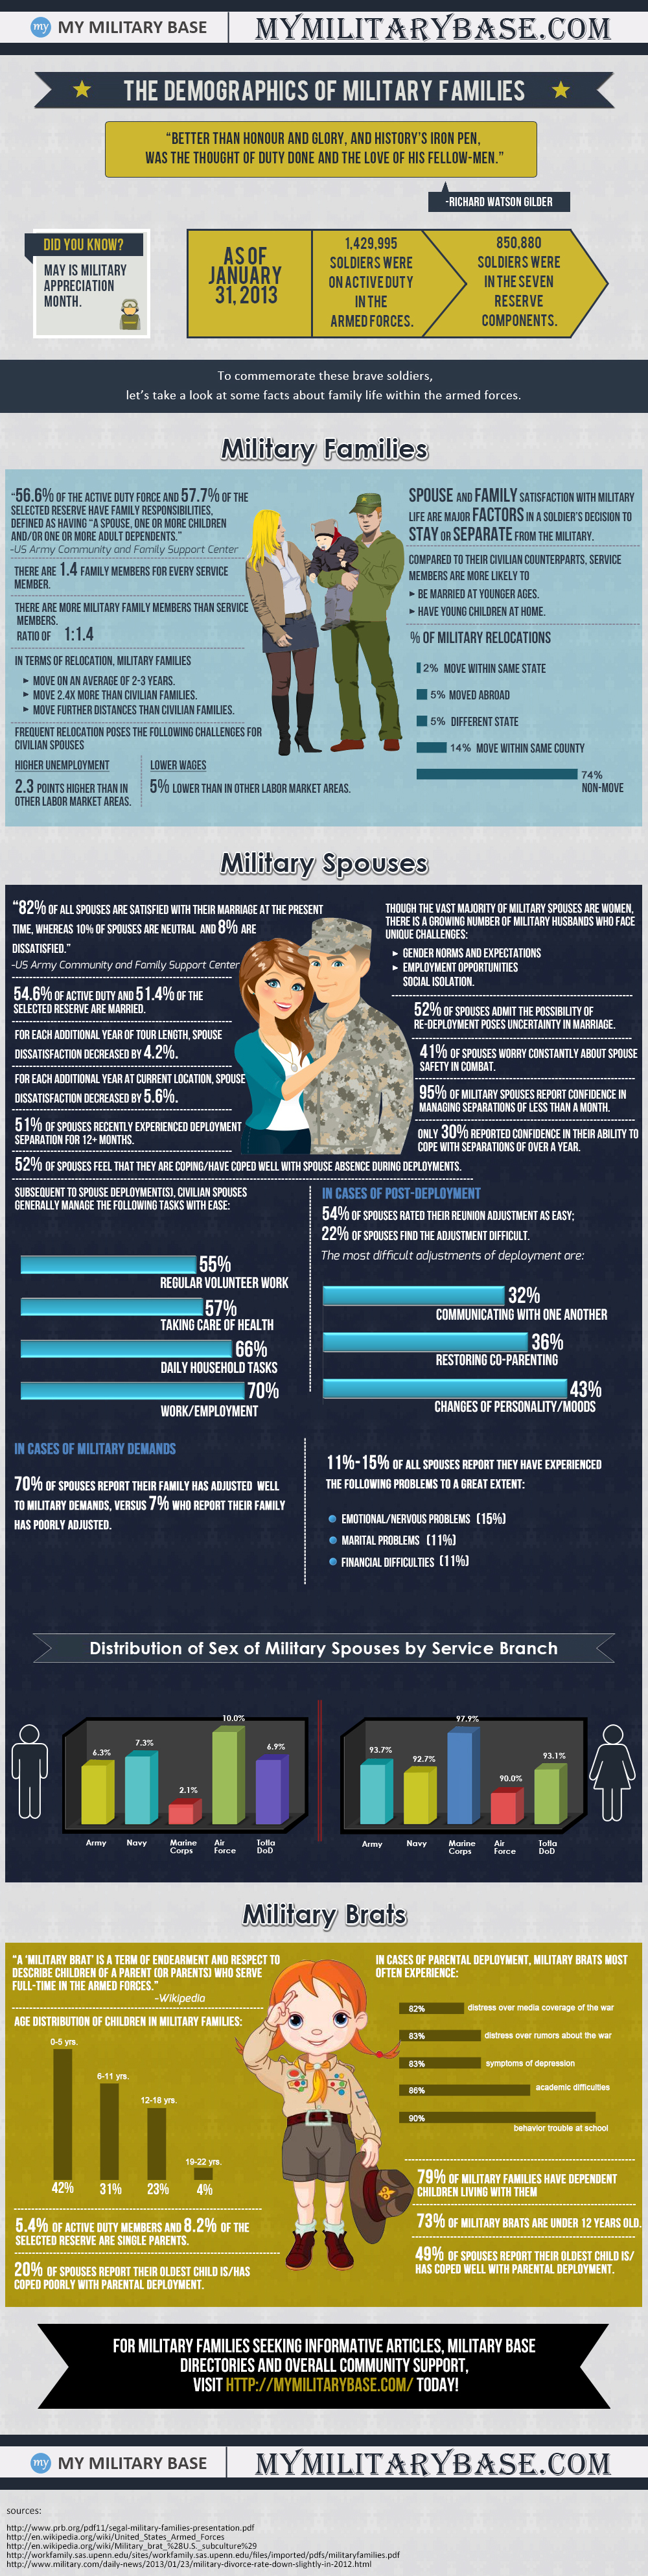 The Demographics of Military Families